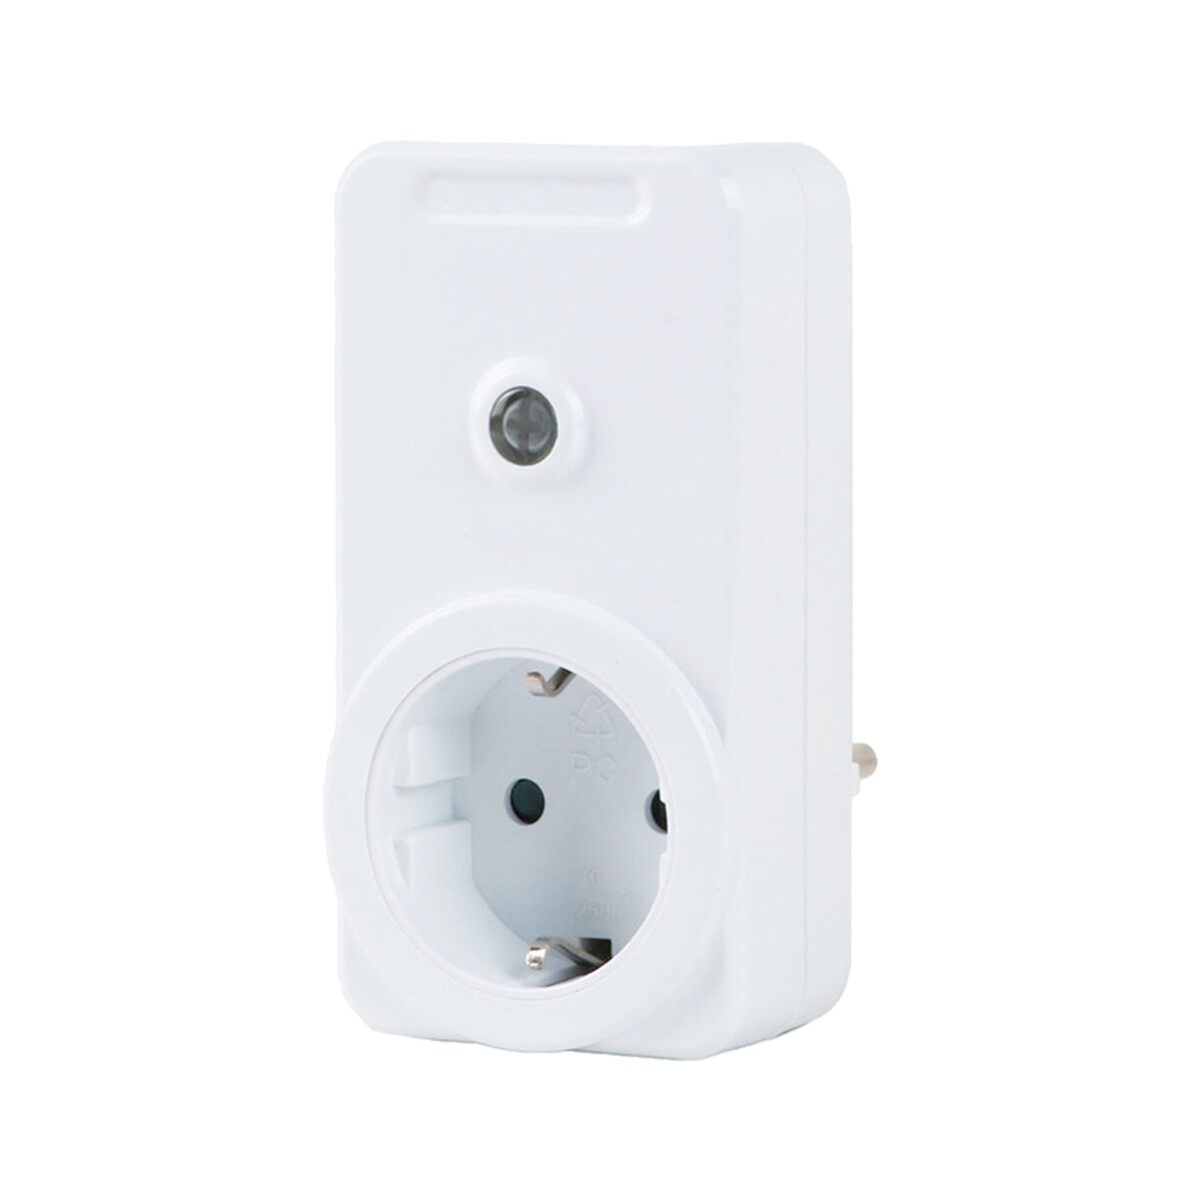 WiFi Socket, Support App remote control RSN903R